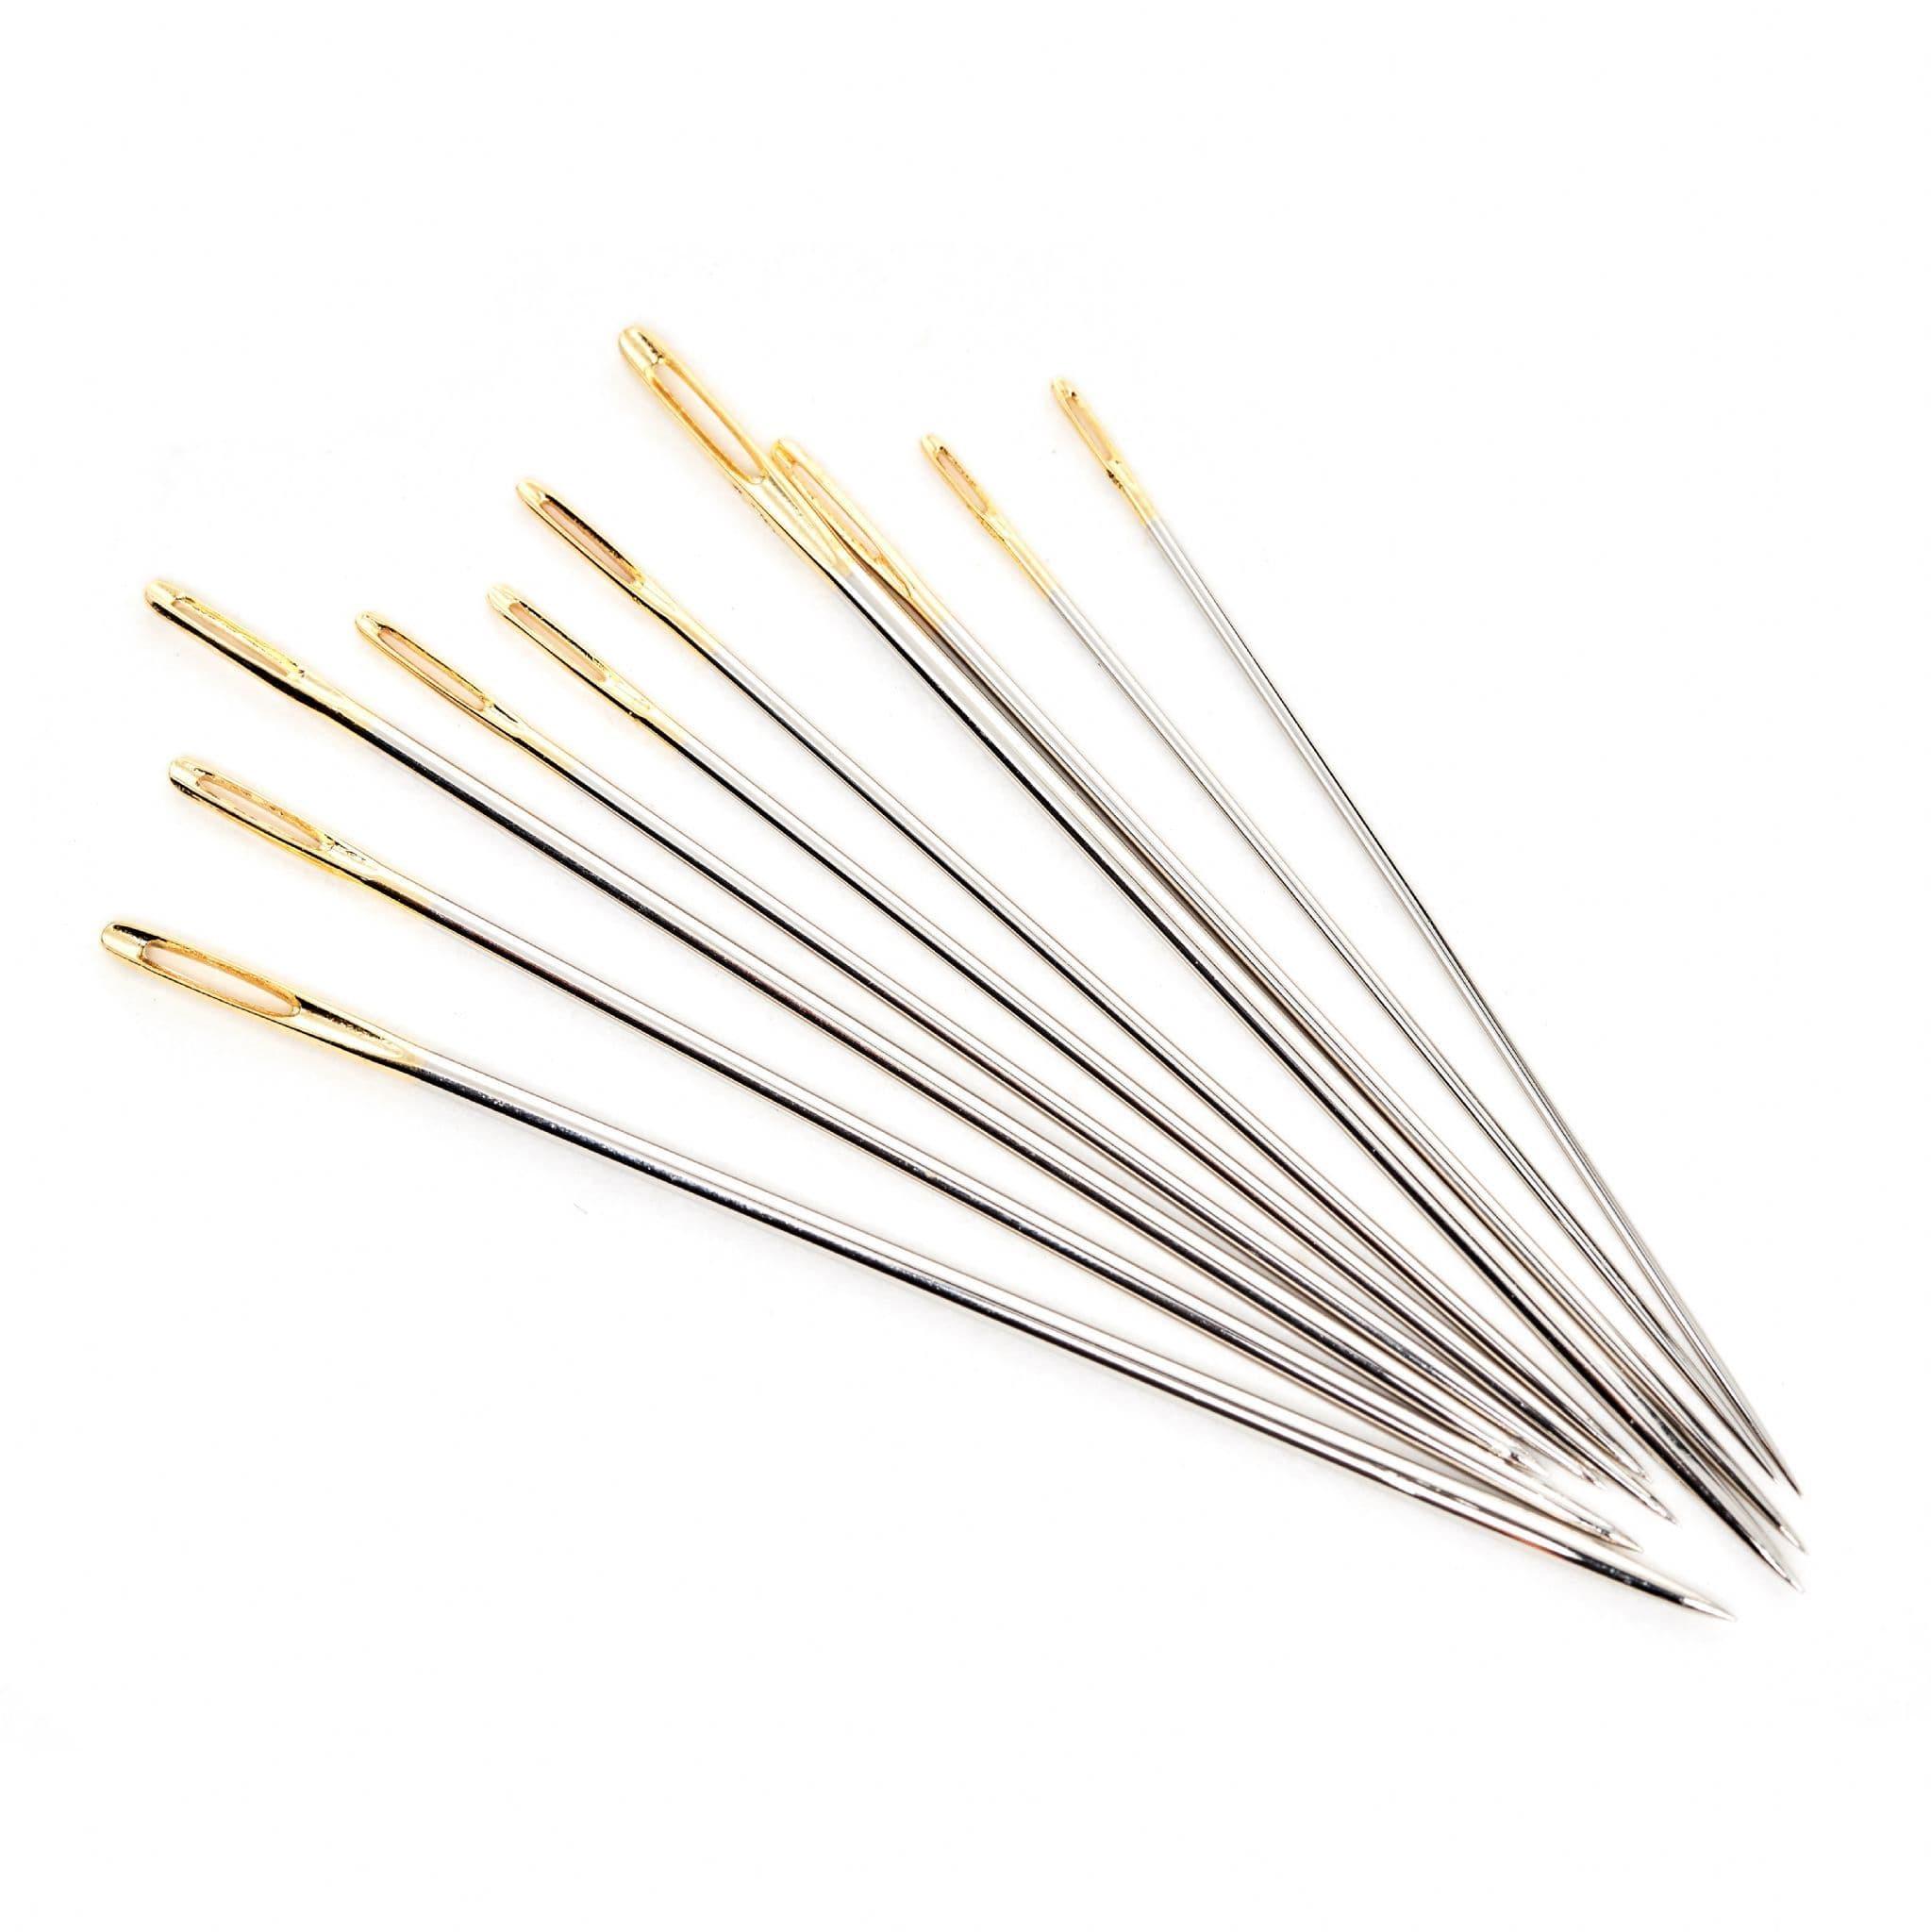 Hemline Gold Embroidery Hand Sewing Needles - Sizes 3-9 - 10 pcs